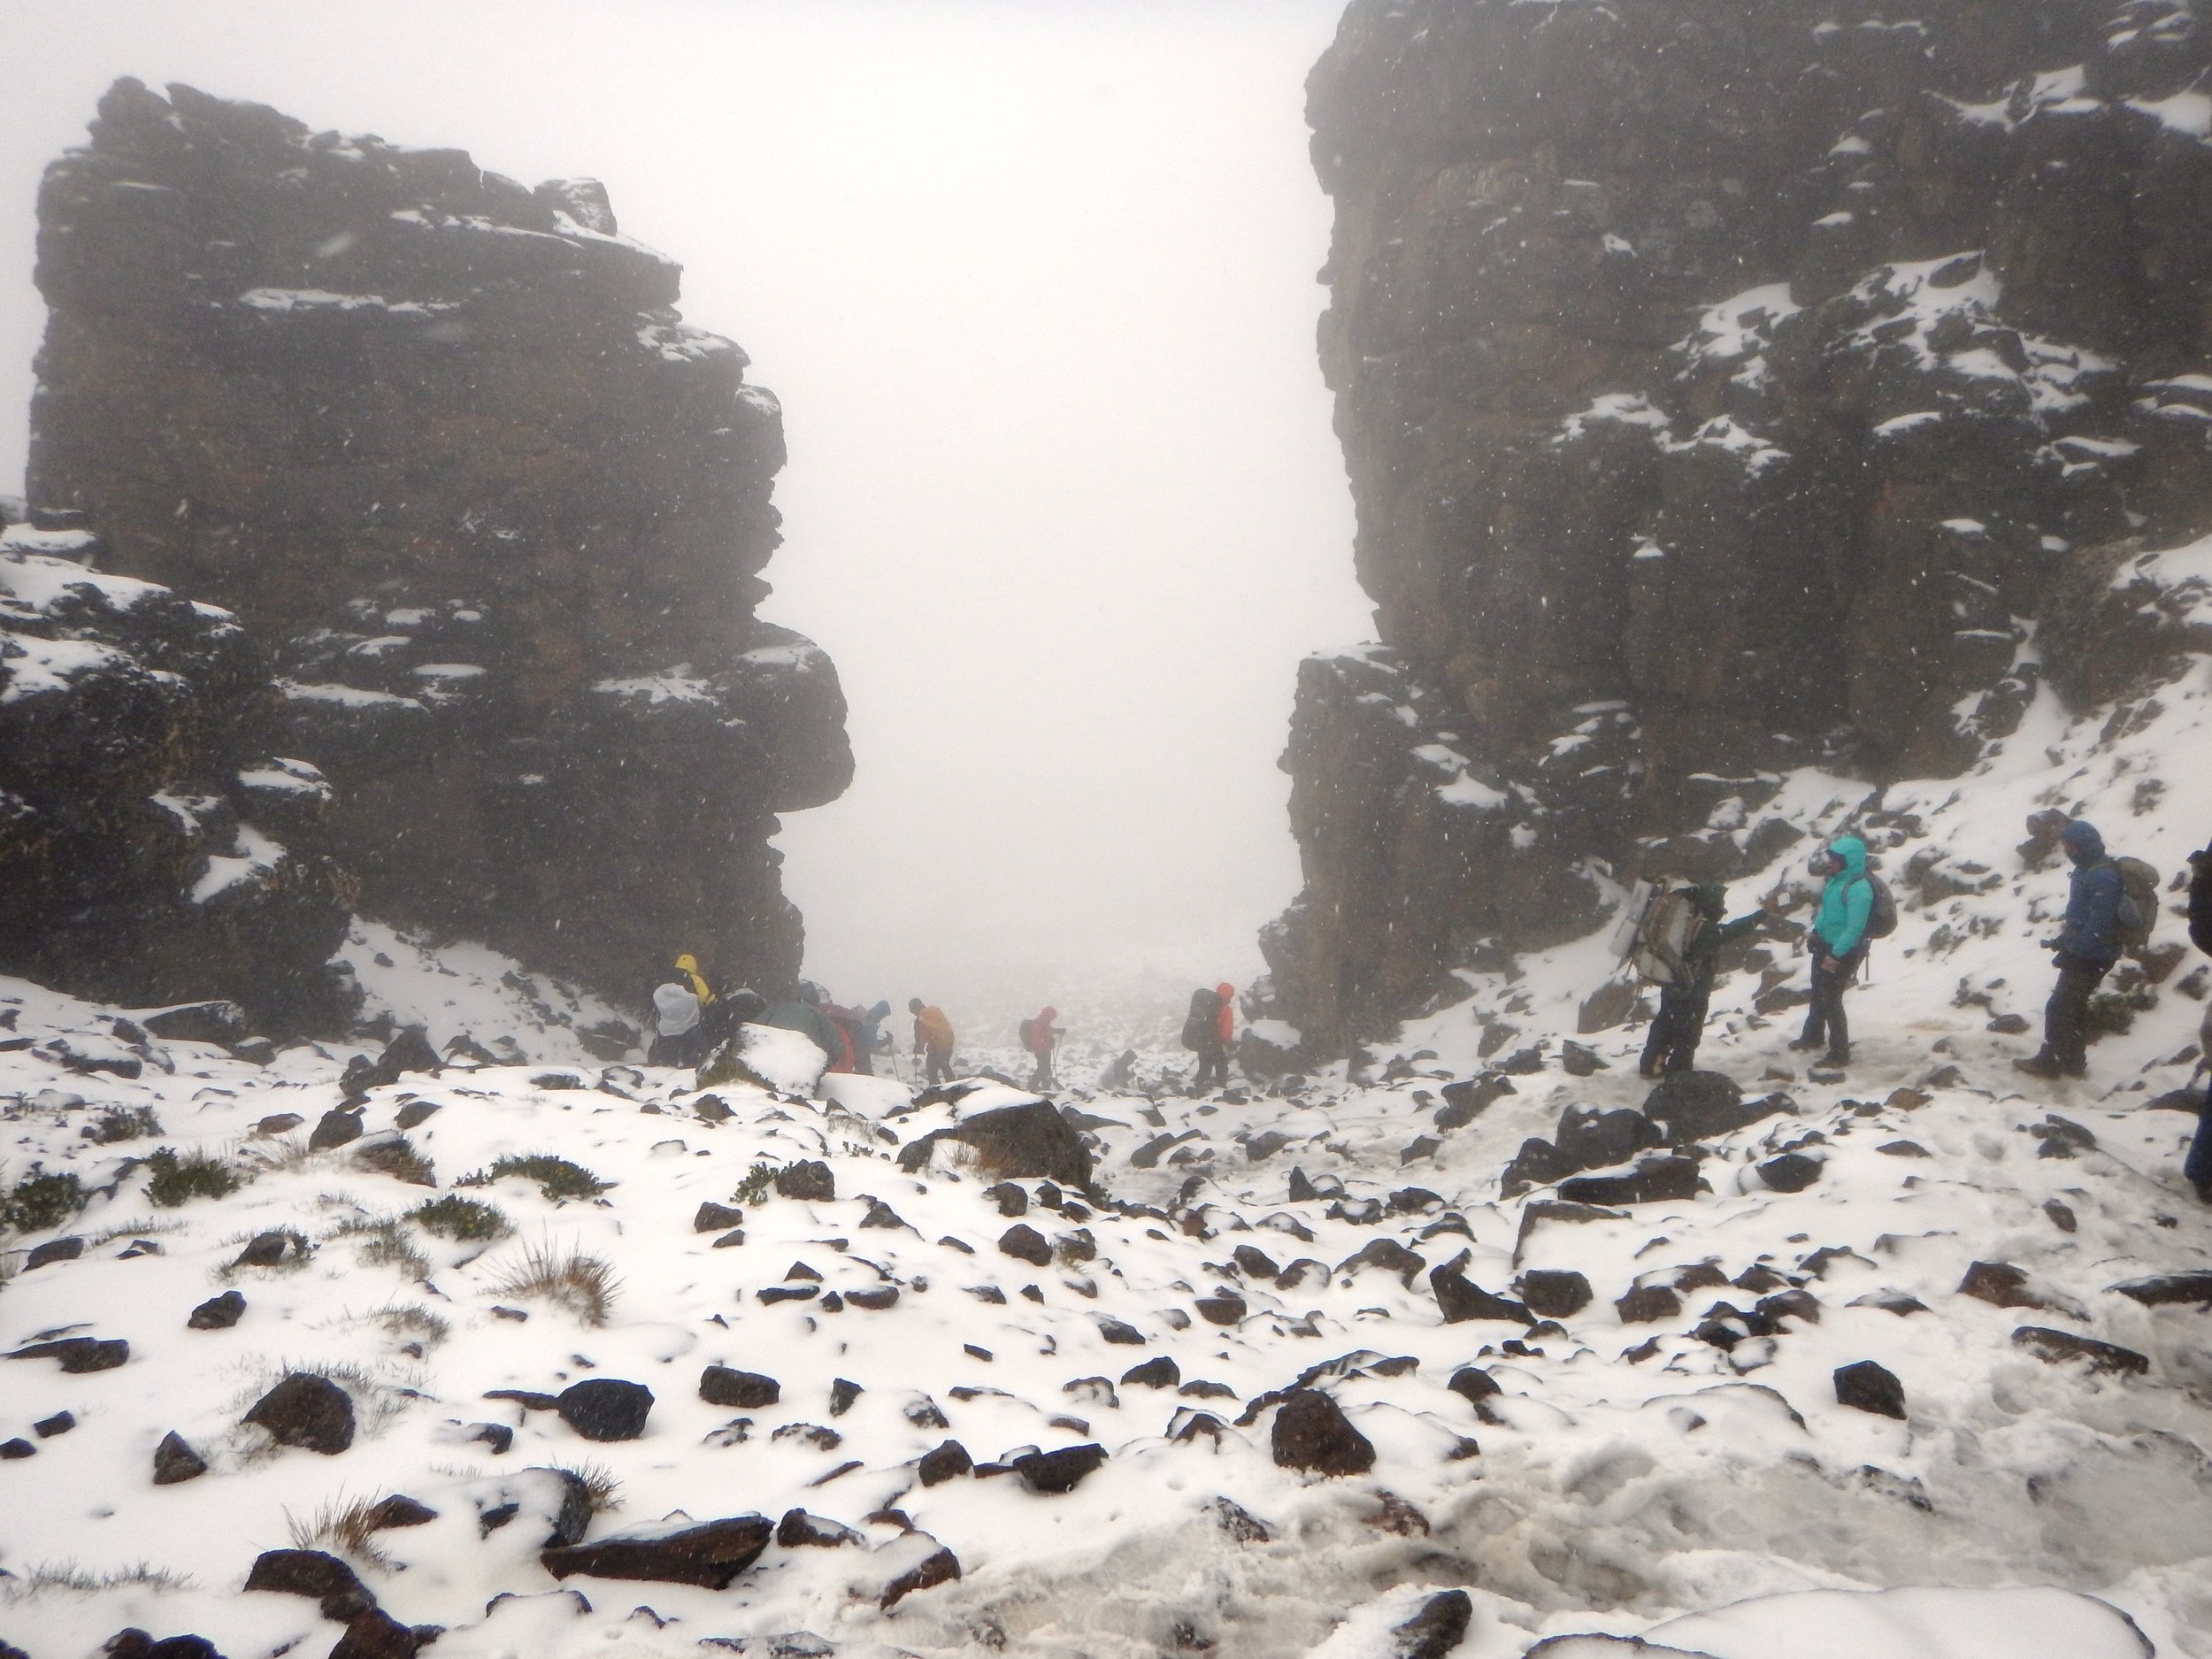 climbing back down from Lava Tower in a wet snow storm